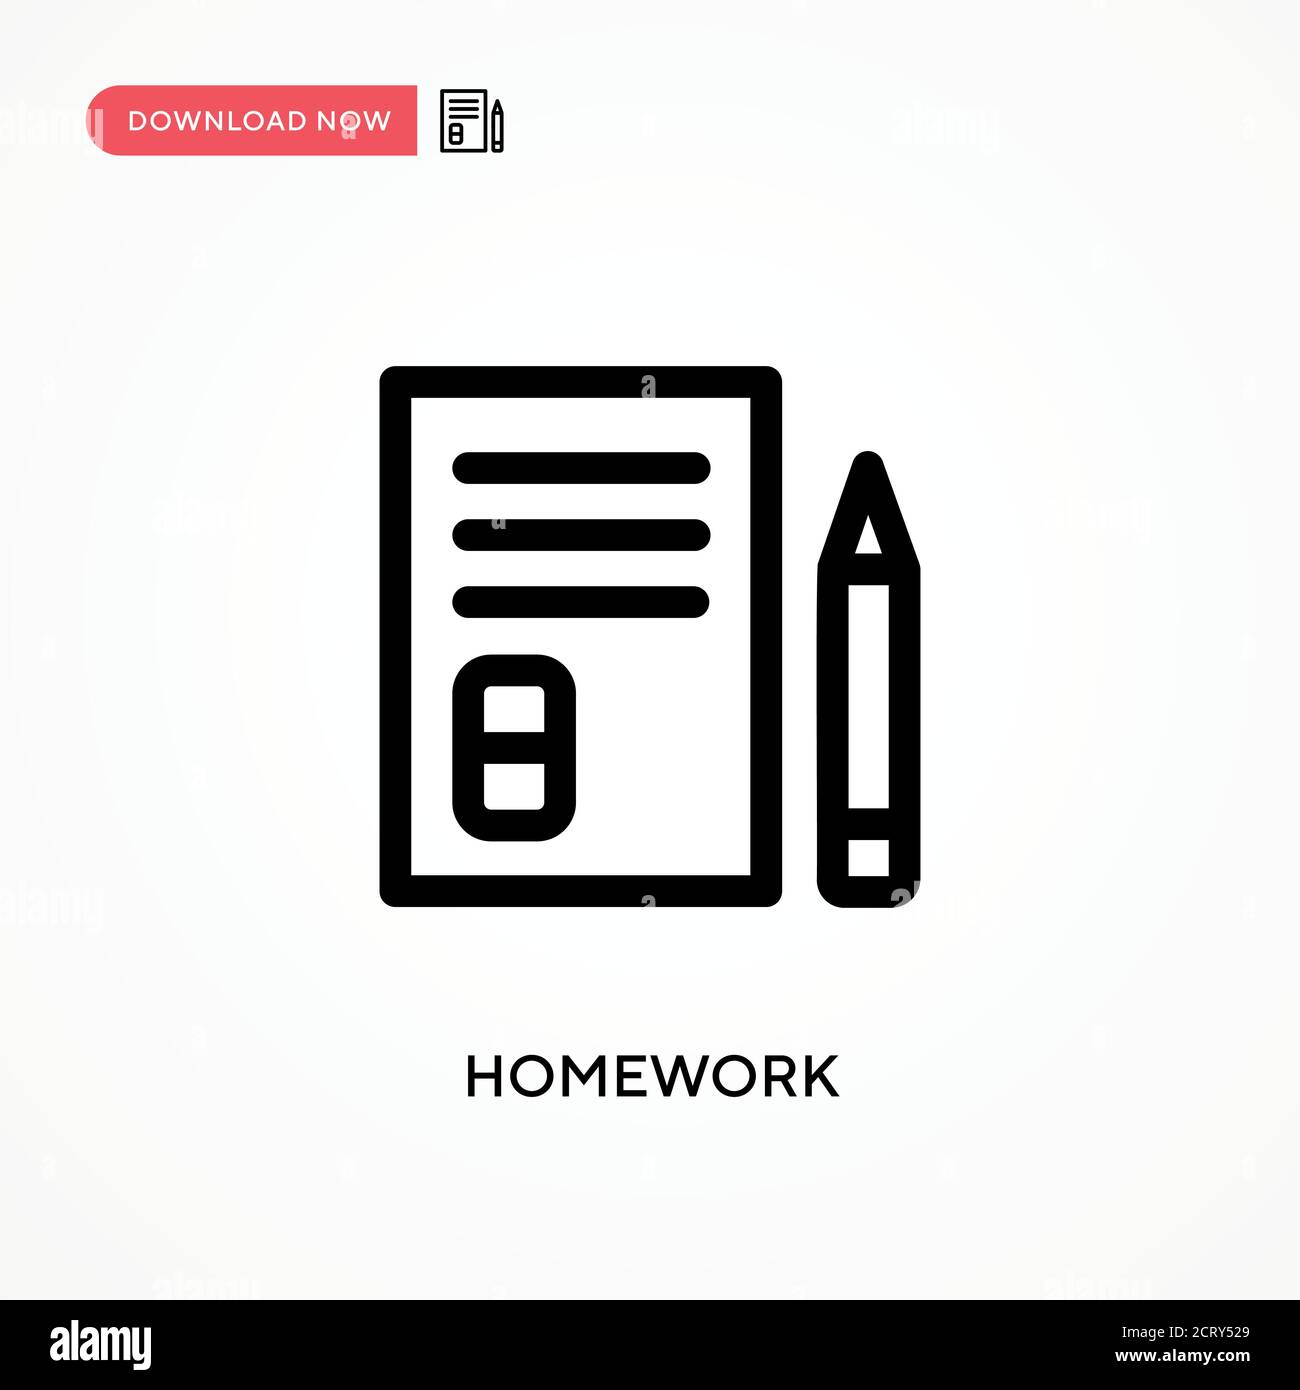 Homework Simple vector icon. Modern, simple flat vector illustration for web site or mobile app Stock Vector